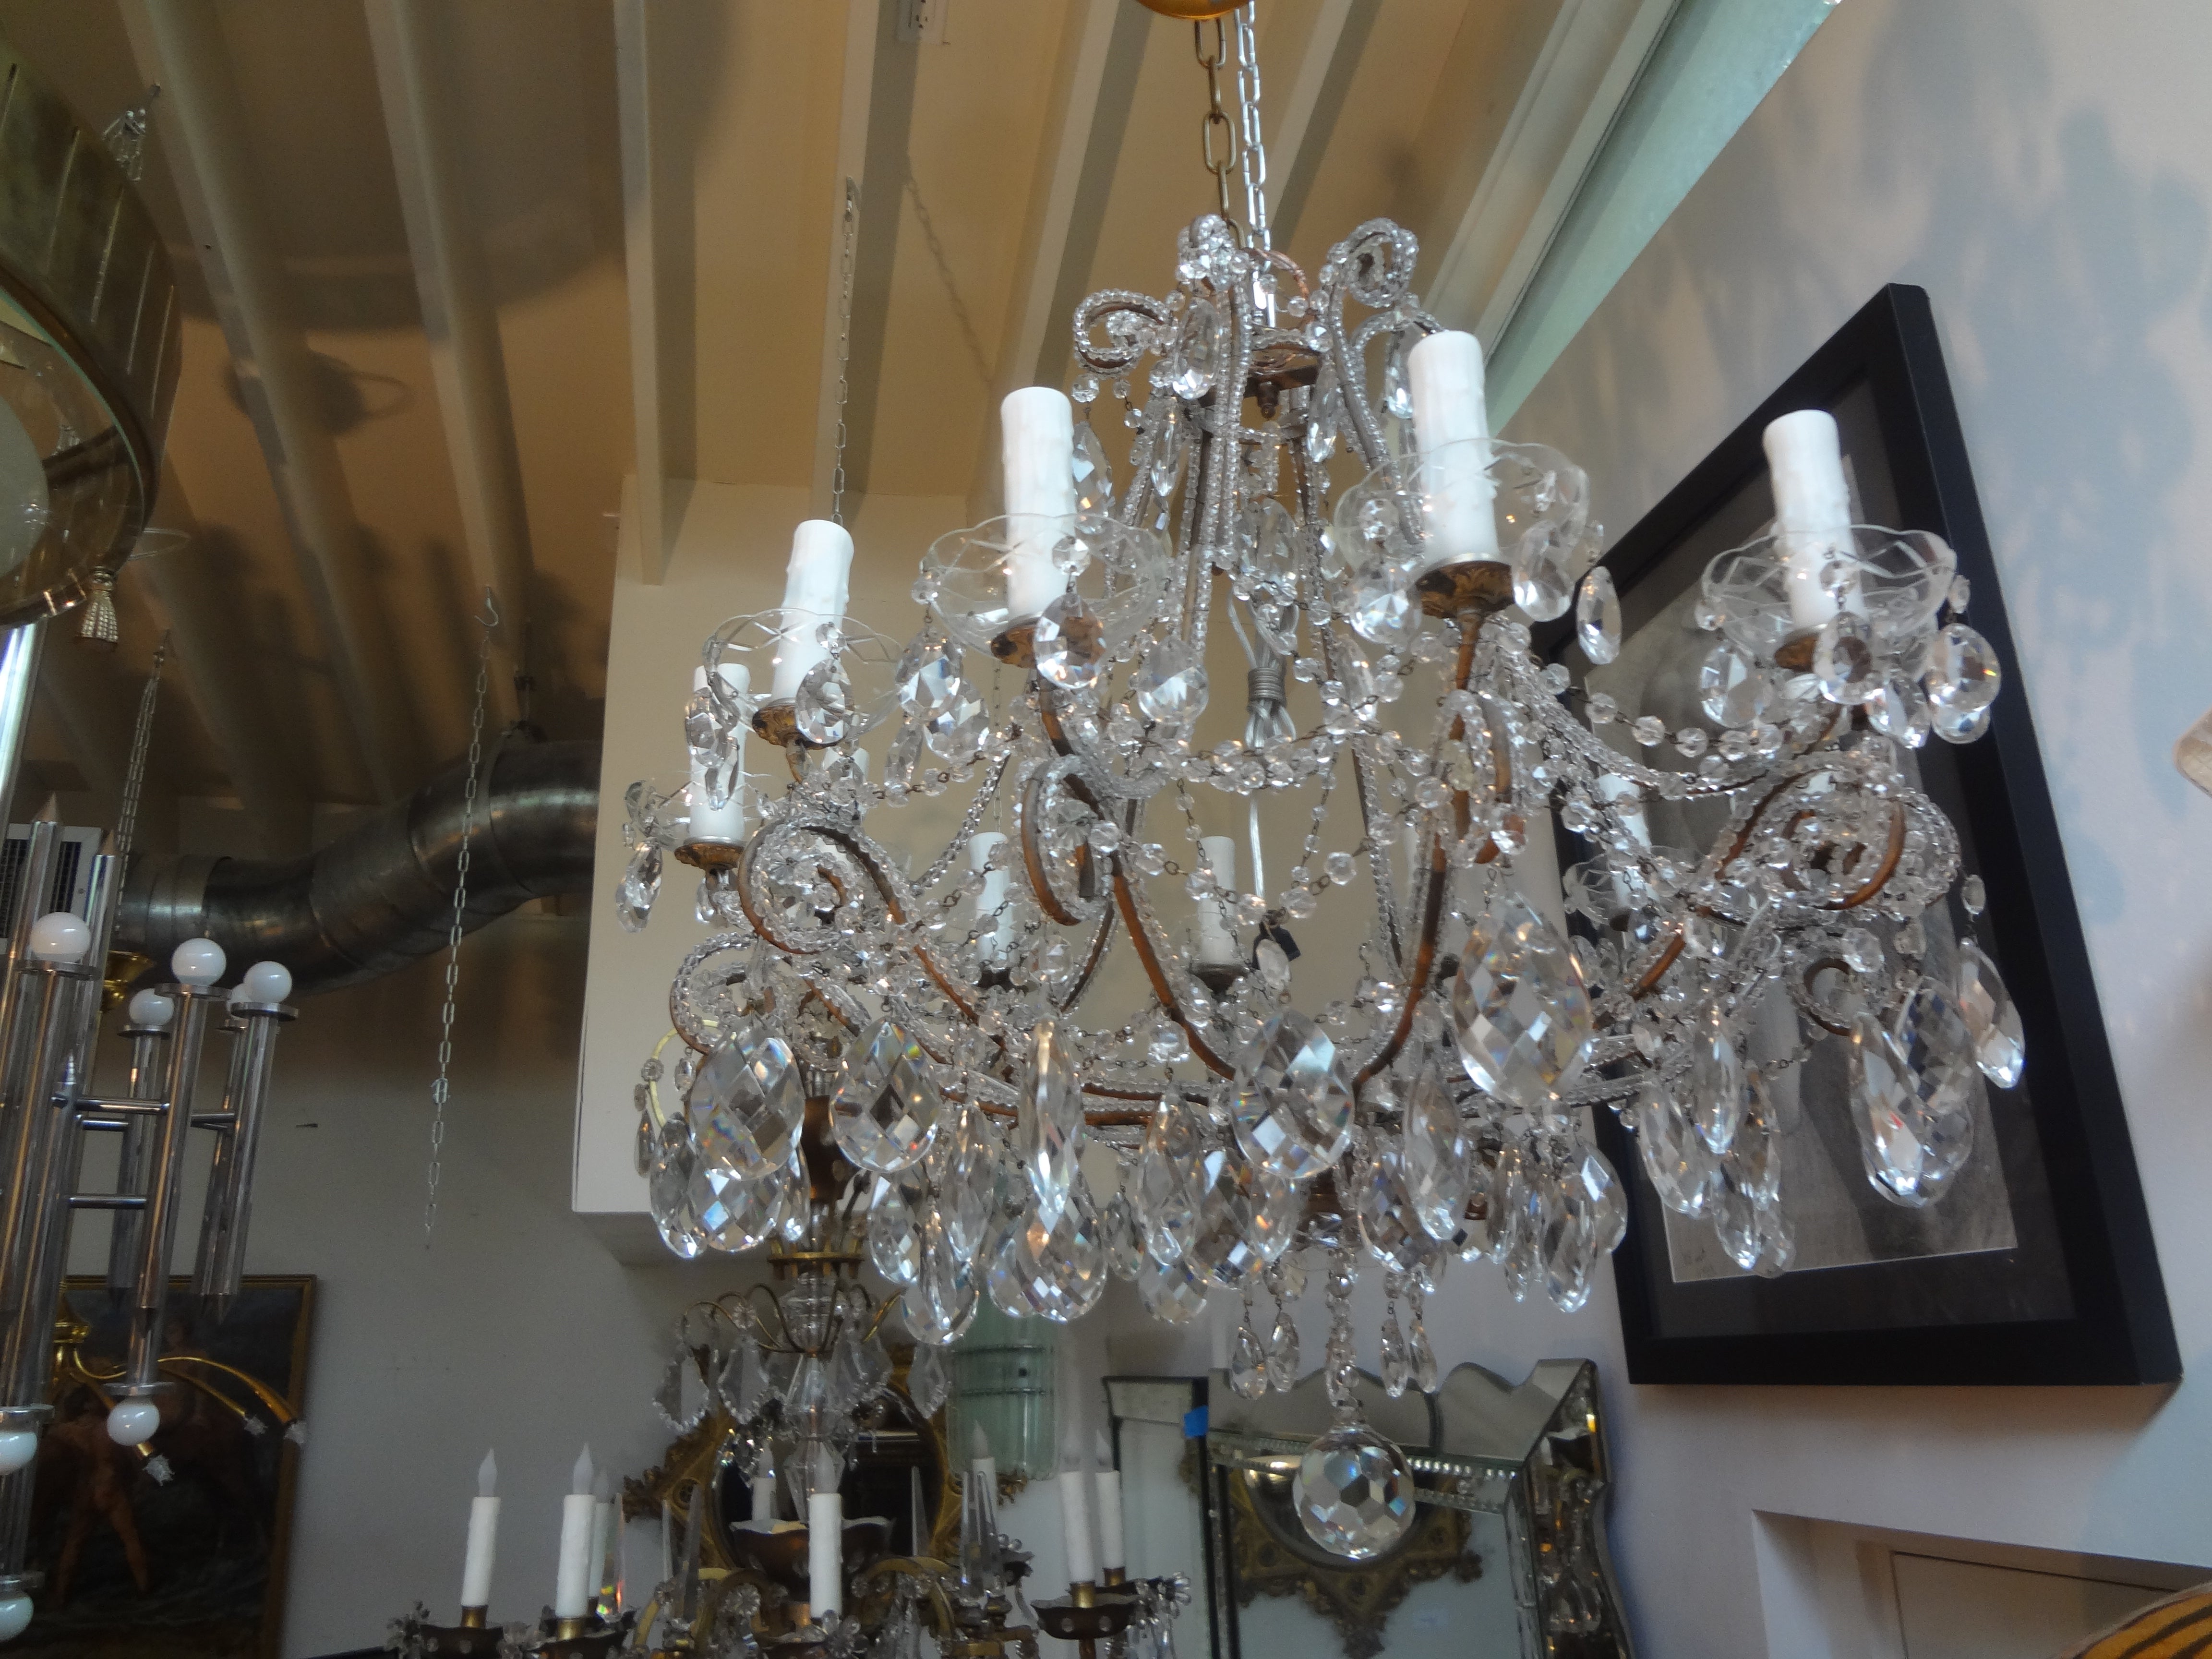 Italian Beaded And Crystal Chandelier
Stunning antique Italian beaded and crystal 12 light chandelier.
This lovely Italian Maison Bagues style crystal chandelier has been newly wired with new sockets for the U.S. market.
Good antique condition.